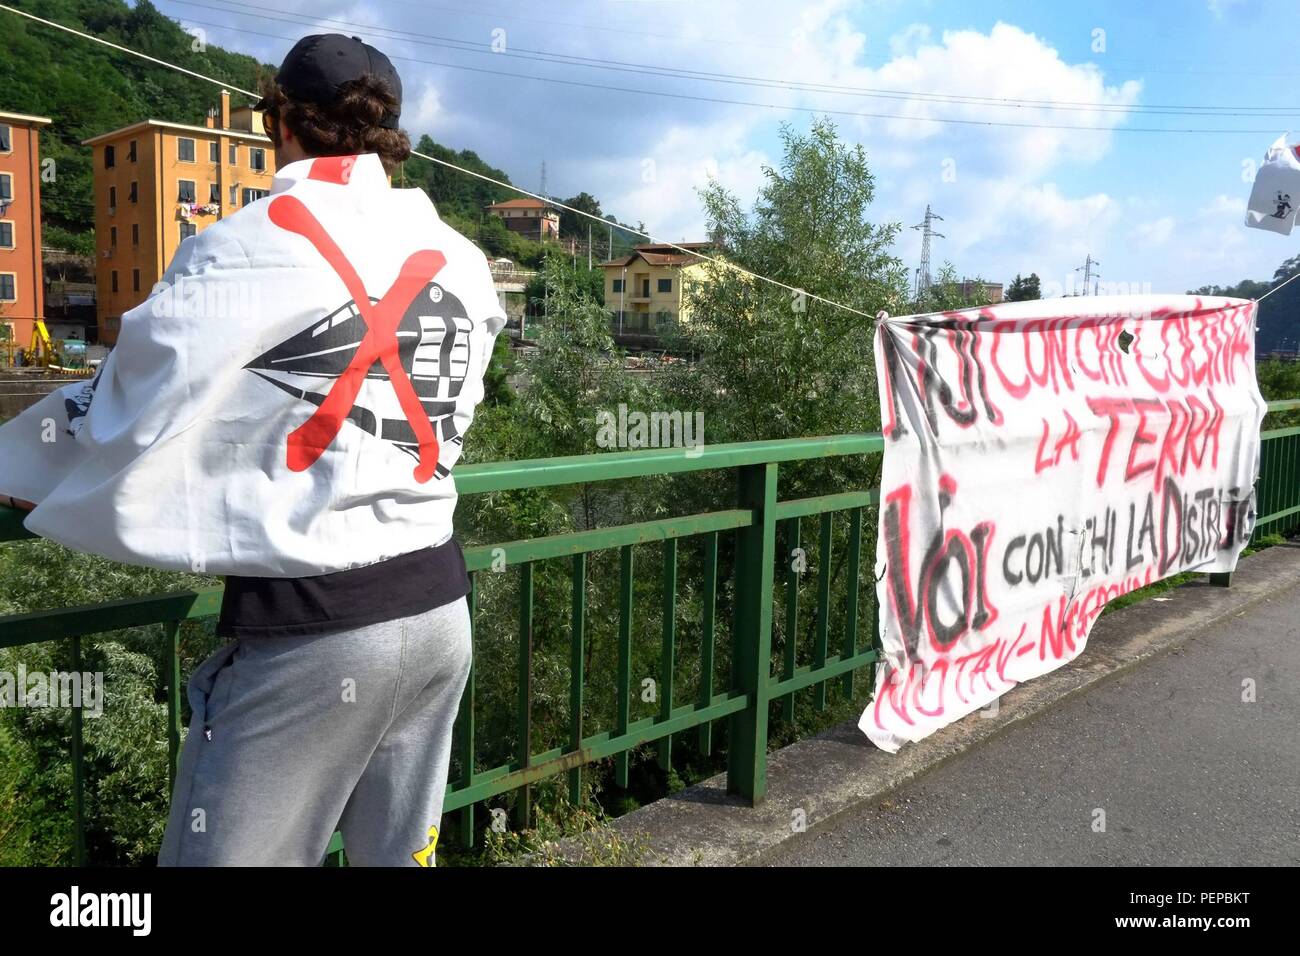 Genoa, Italy. 17th Aug, 2018. BANNER NO TAV NO GUTTER AGAINST THE REALIZATION OF THE THIRD VALLEY IN GENOA (news genova AR/FP, GENOVA - 2013-07-25) ps the photo can be used in respect of the context in which it was taken, and without the defamatory intent of the decorum of the represented people (news genova AR/FP, Foto Repertorio - 2018-08-17) ps the photo can be used respecting the context in which it was taken, and without the defamatory intent of the decoration of the people represented. Credit: Independent Photo Agency Srl/Alamy Live News Stock Photo